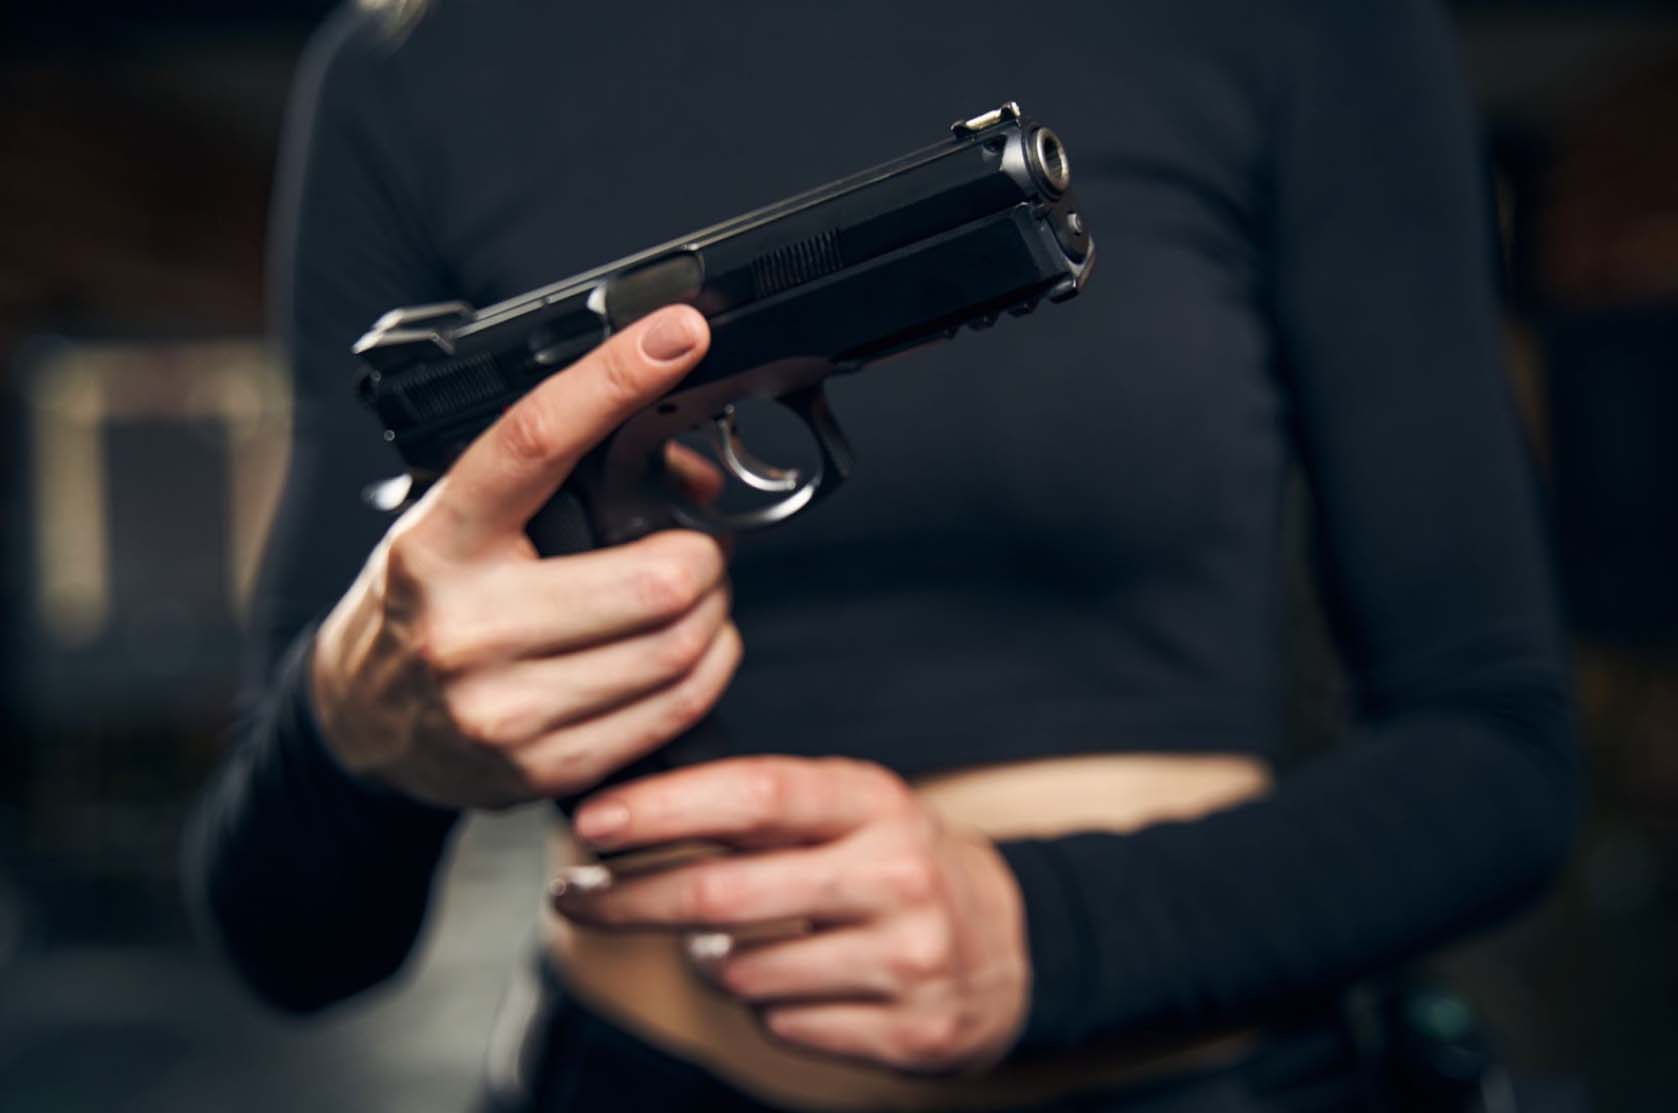 Female shooter, face obscured, readies her handgun for an indoor shooting drill.